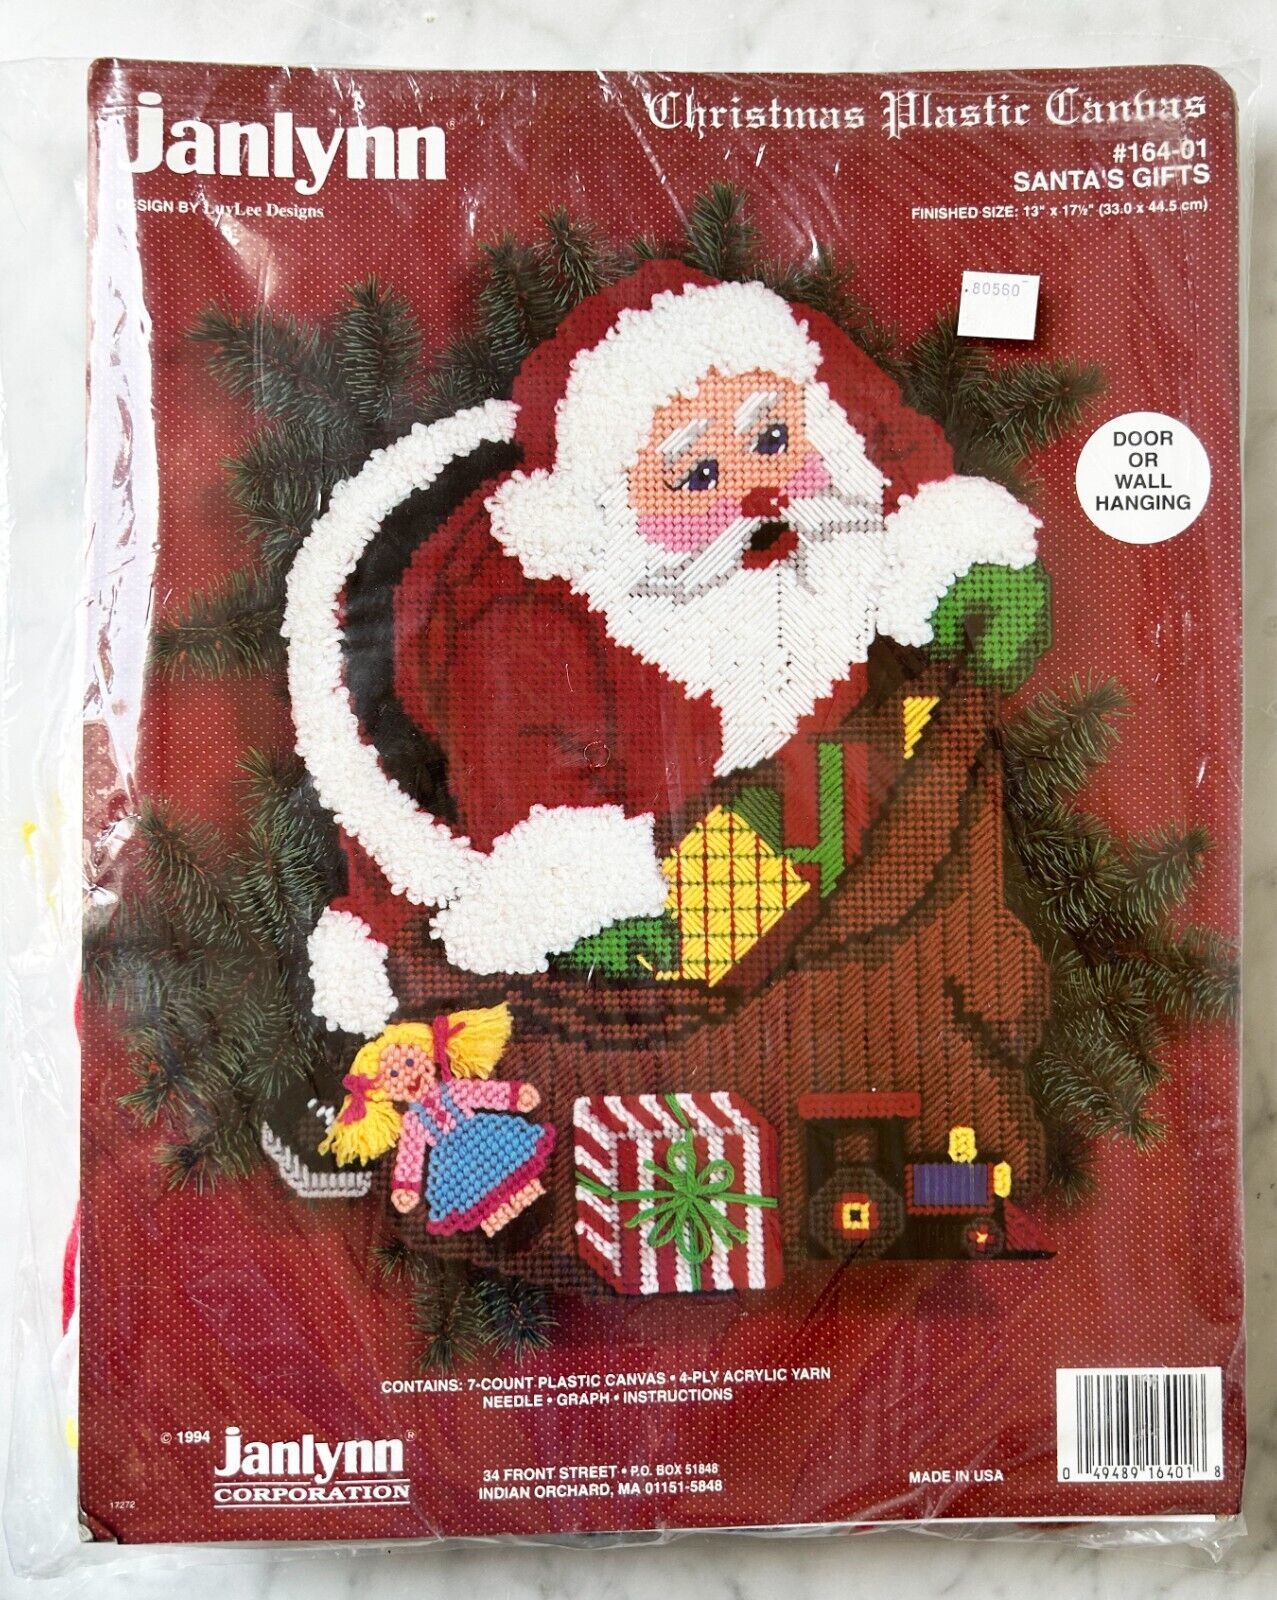 Primary image for Janlynn Santa's Gifts Christmas Plastic Canvas Kit Door/Wall Hanging 13 x 17.5